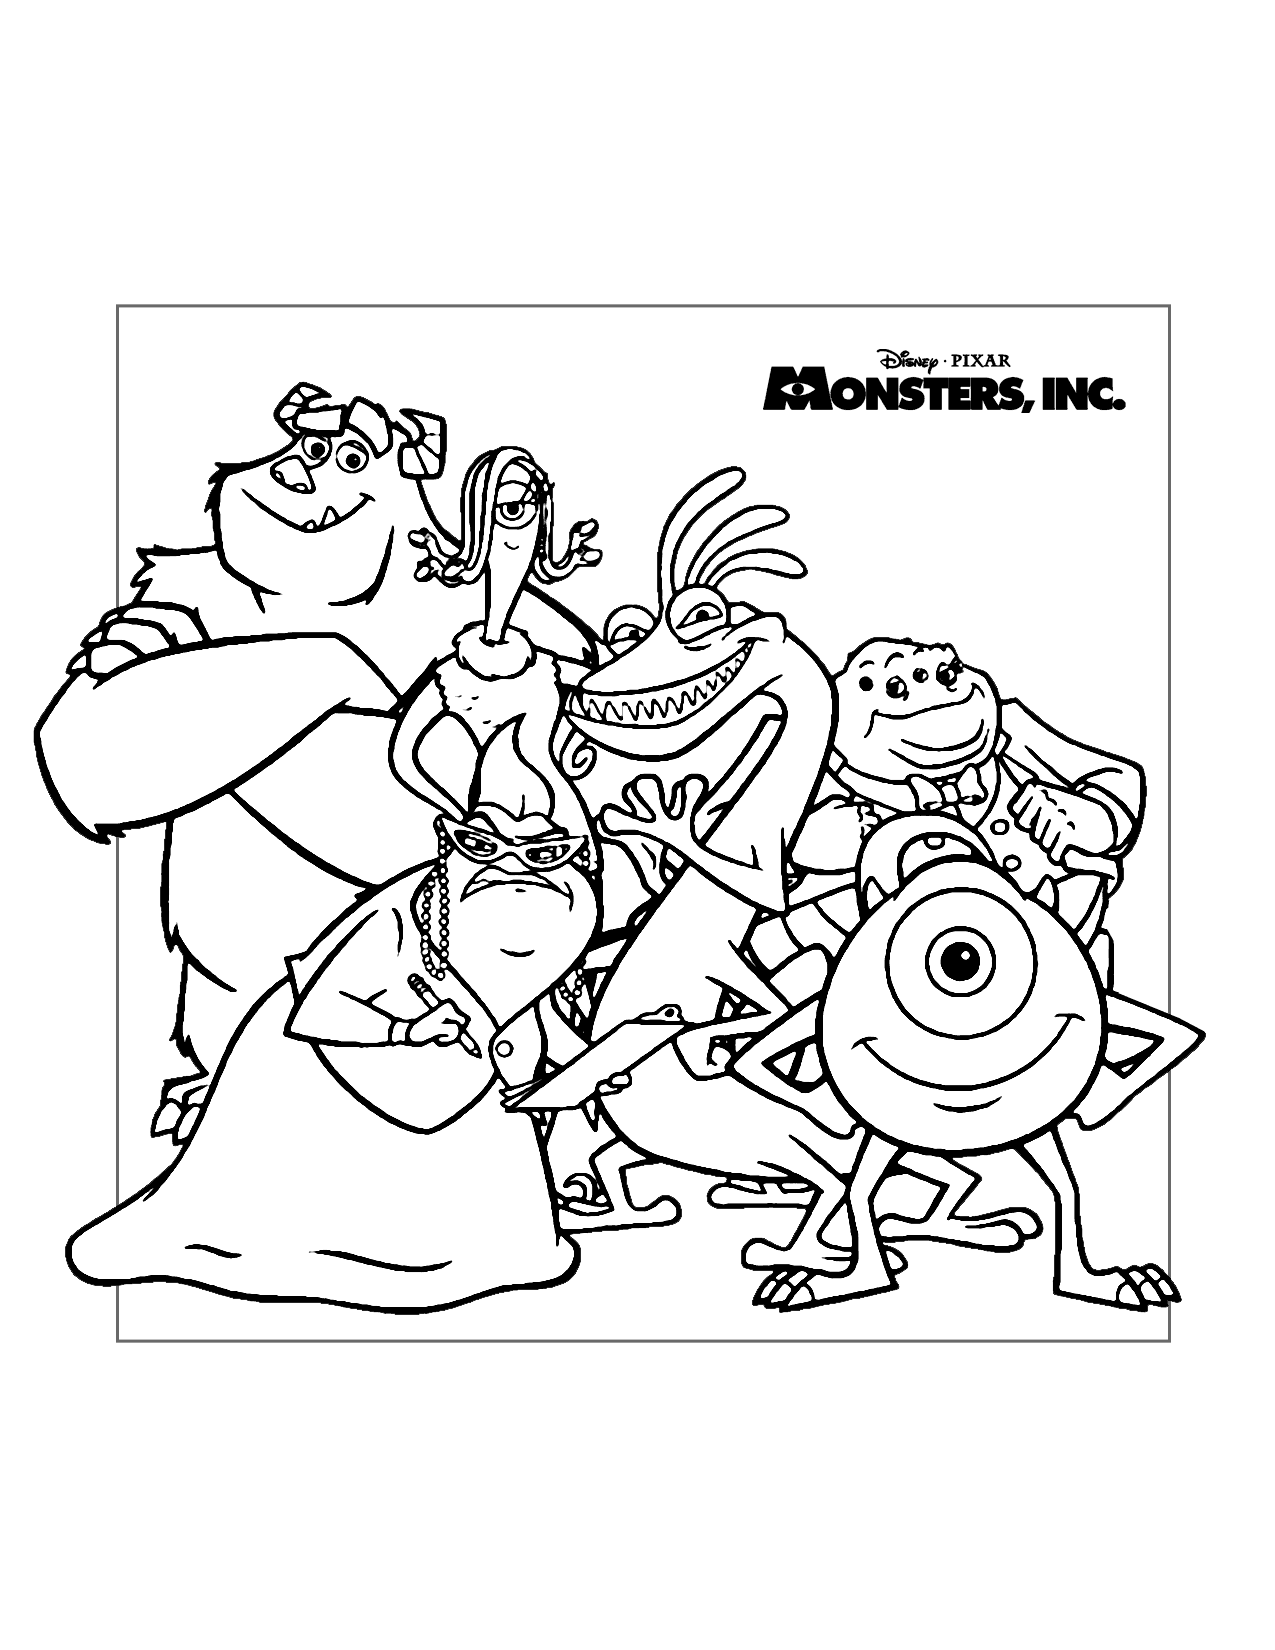 Monsters Inc Character Coloring Page